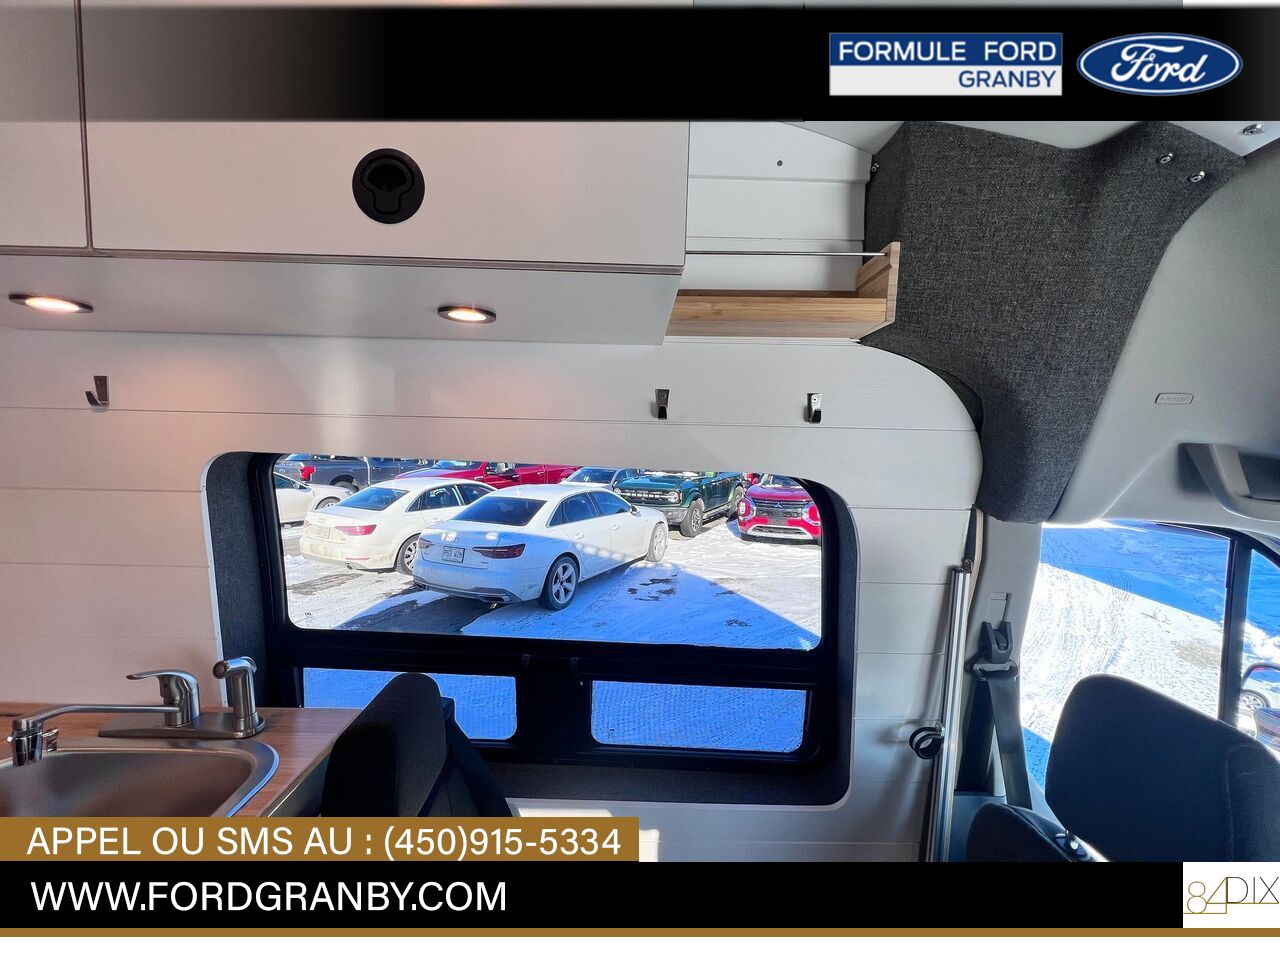 Ford Transit fourgon utilitaire 2019 Granby - photo #29